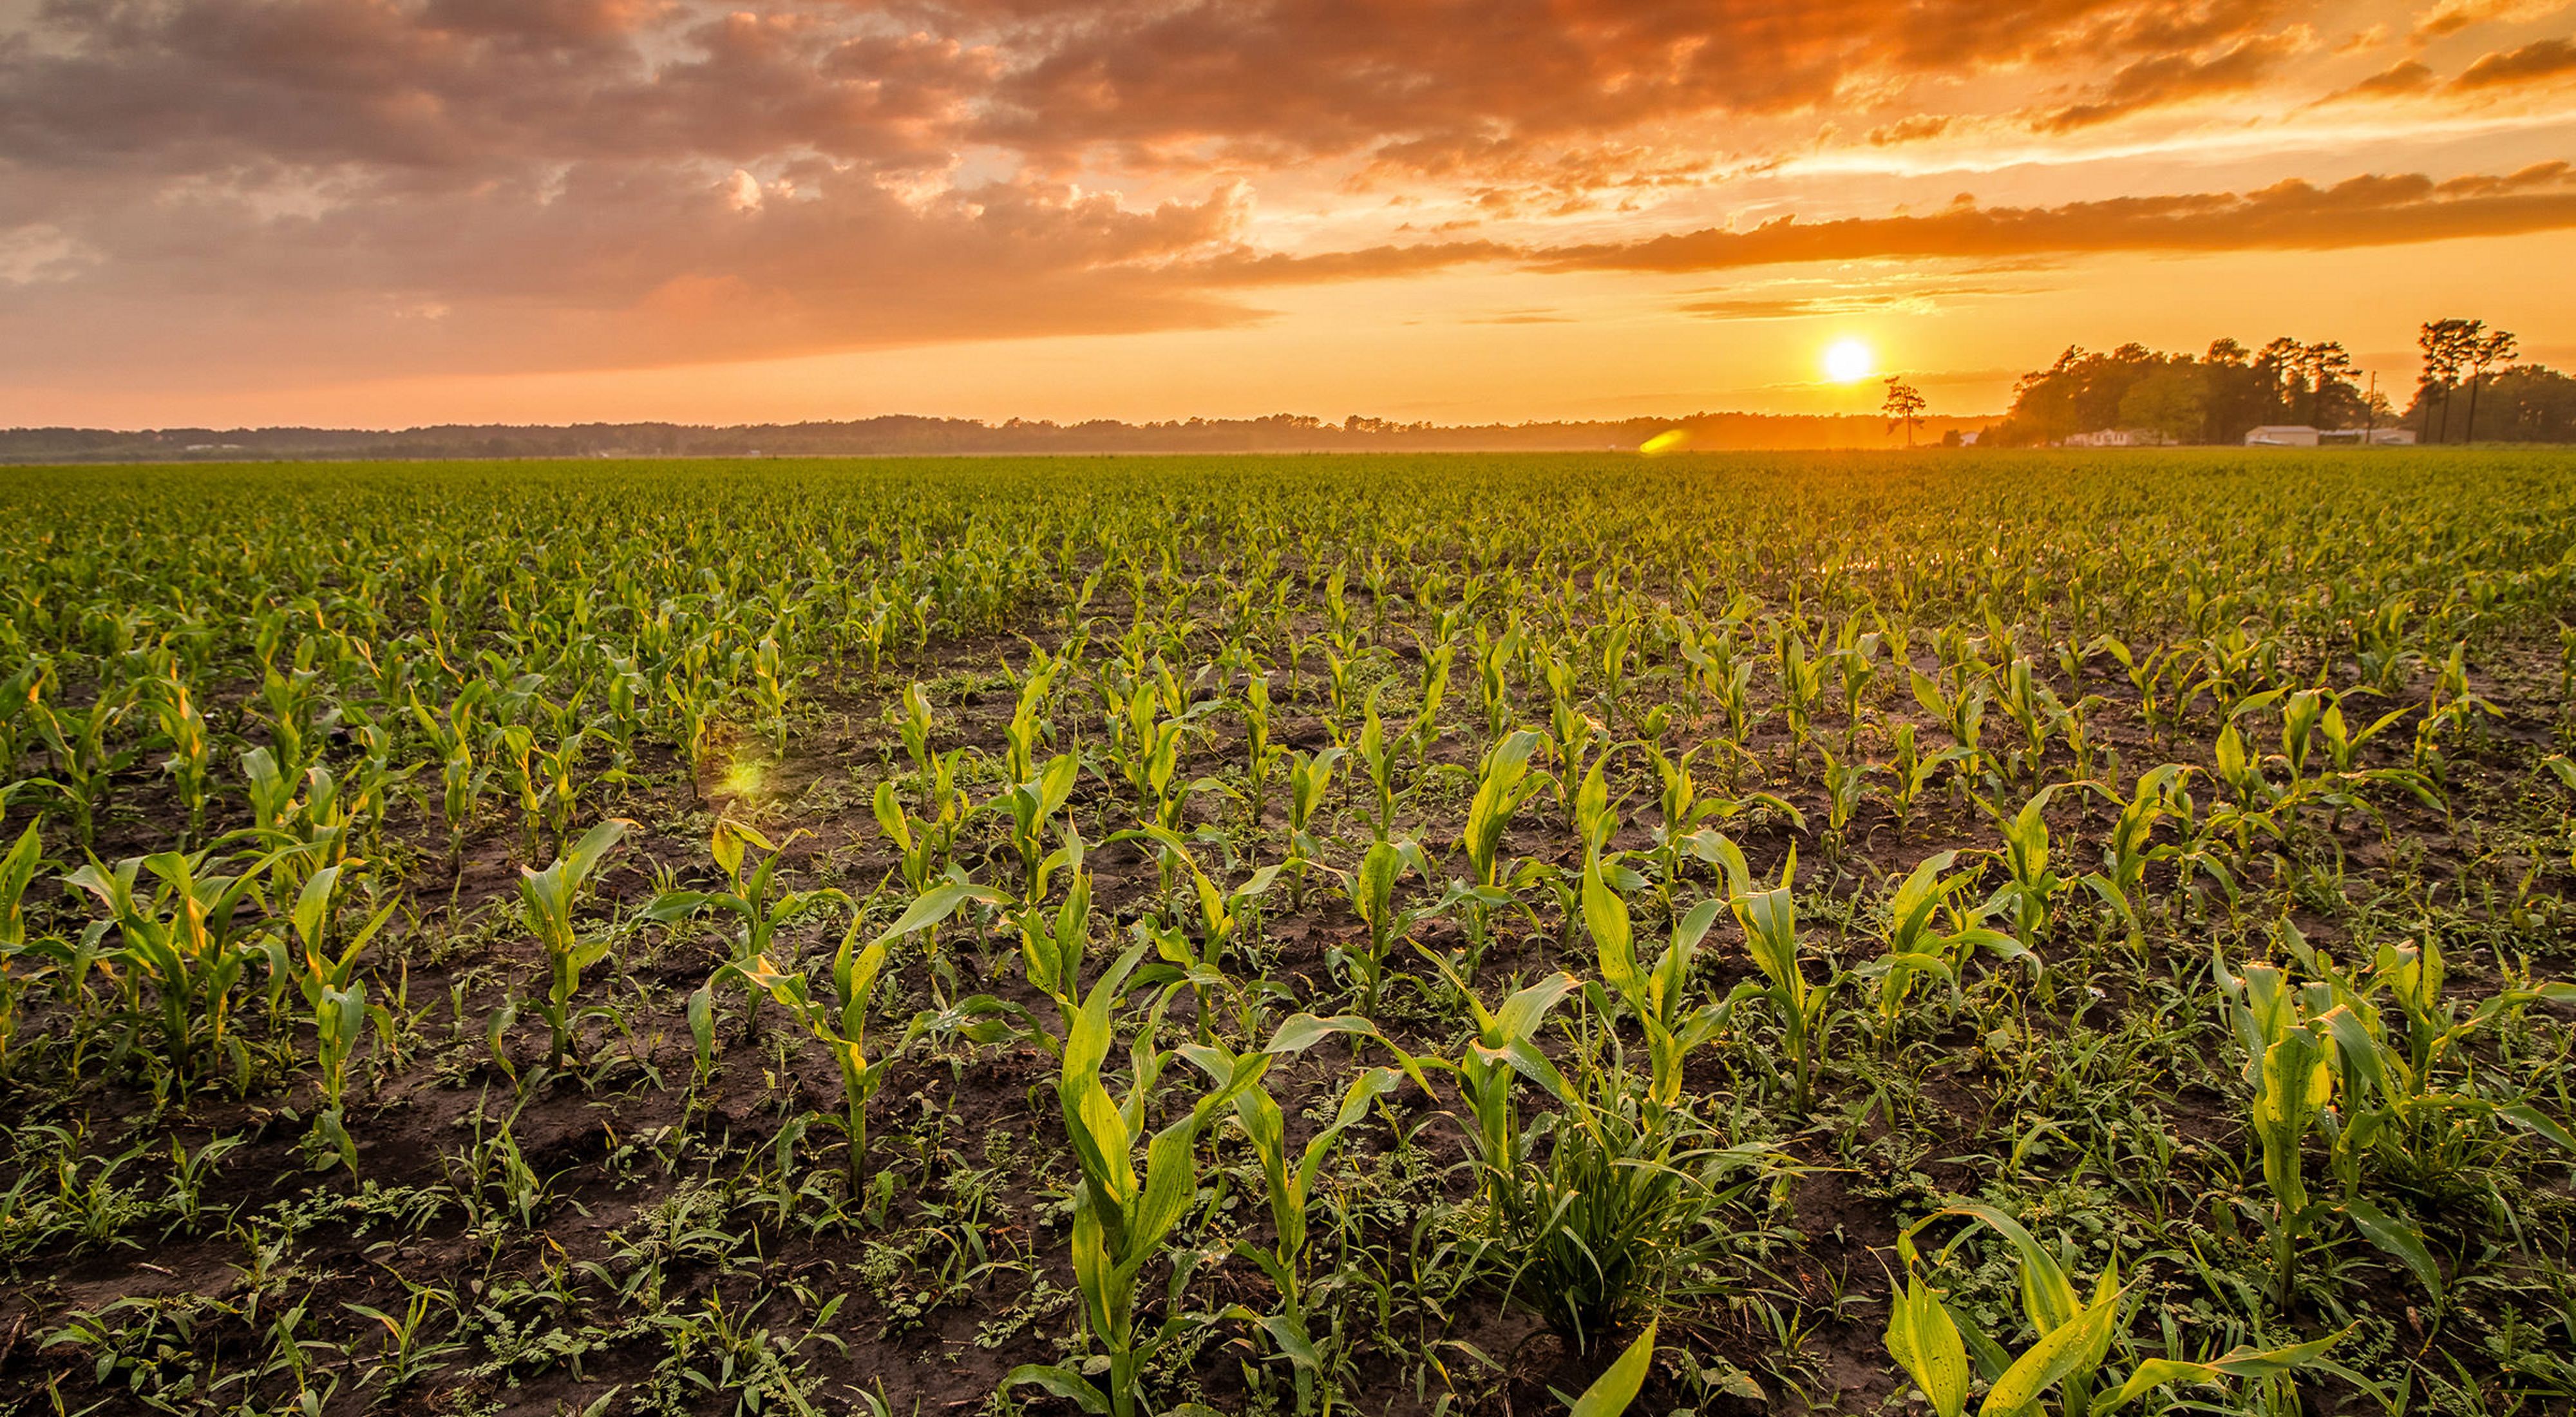 sunsetting over a field of corn